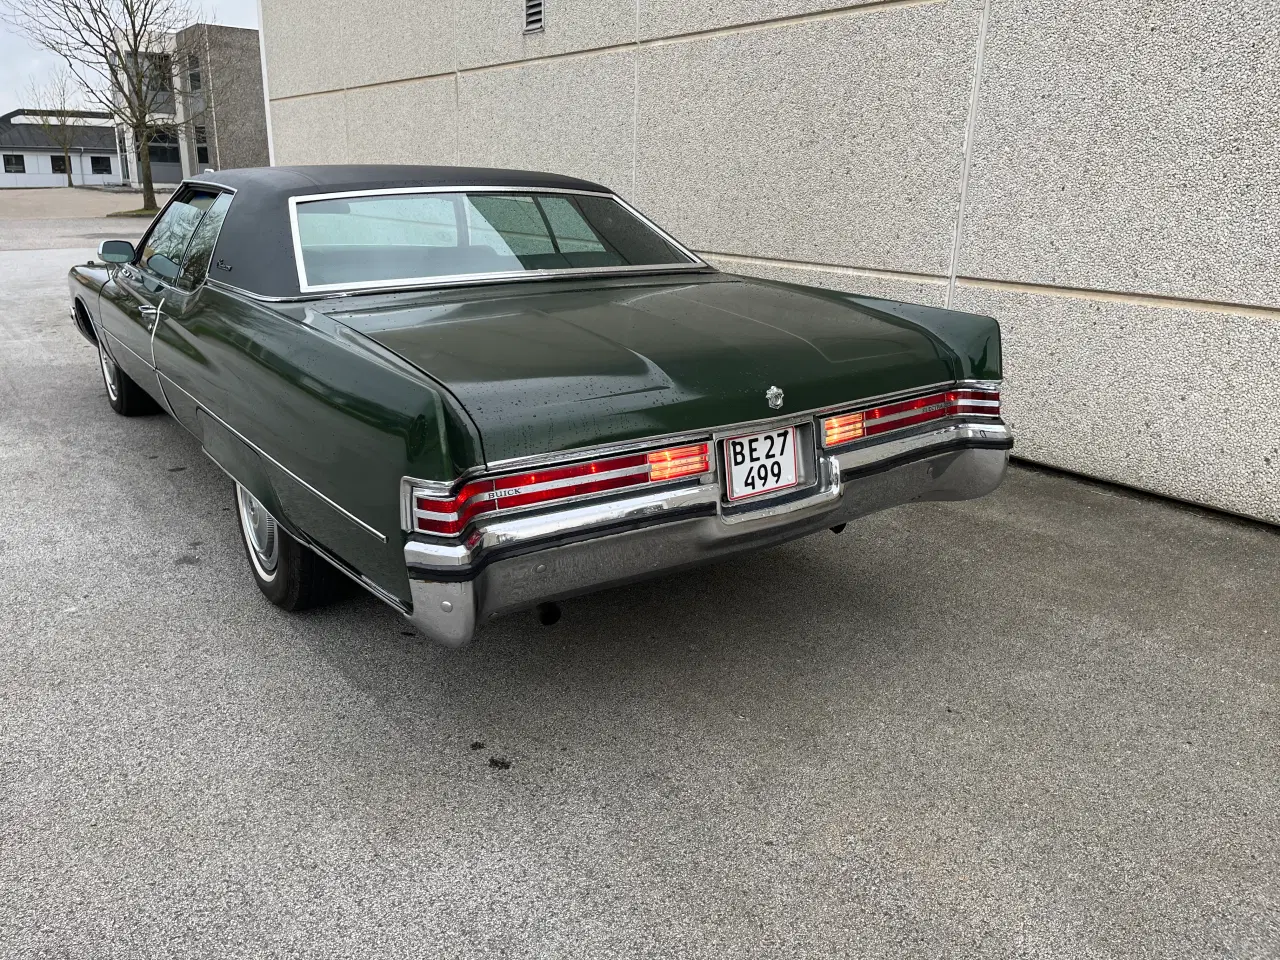 Billede 4 - Buick Electra 225 coupe